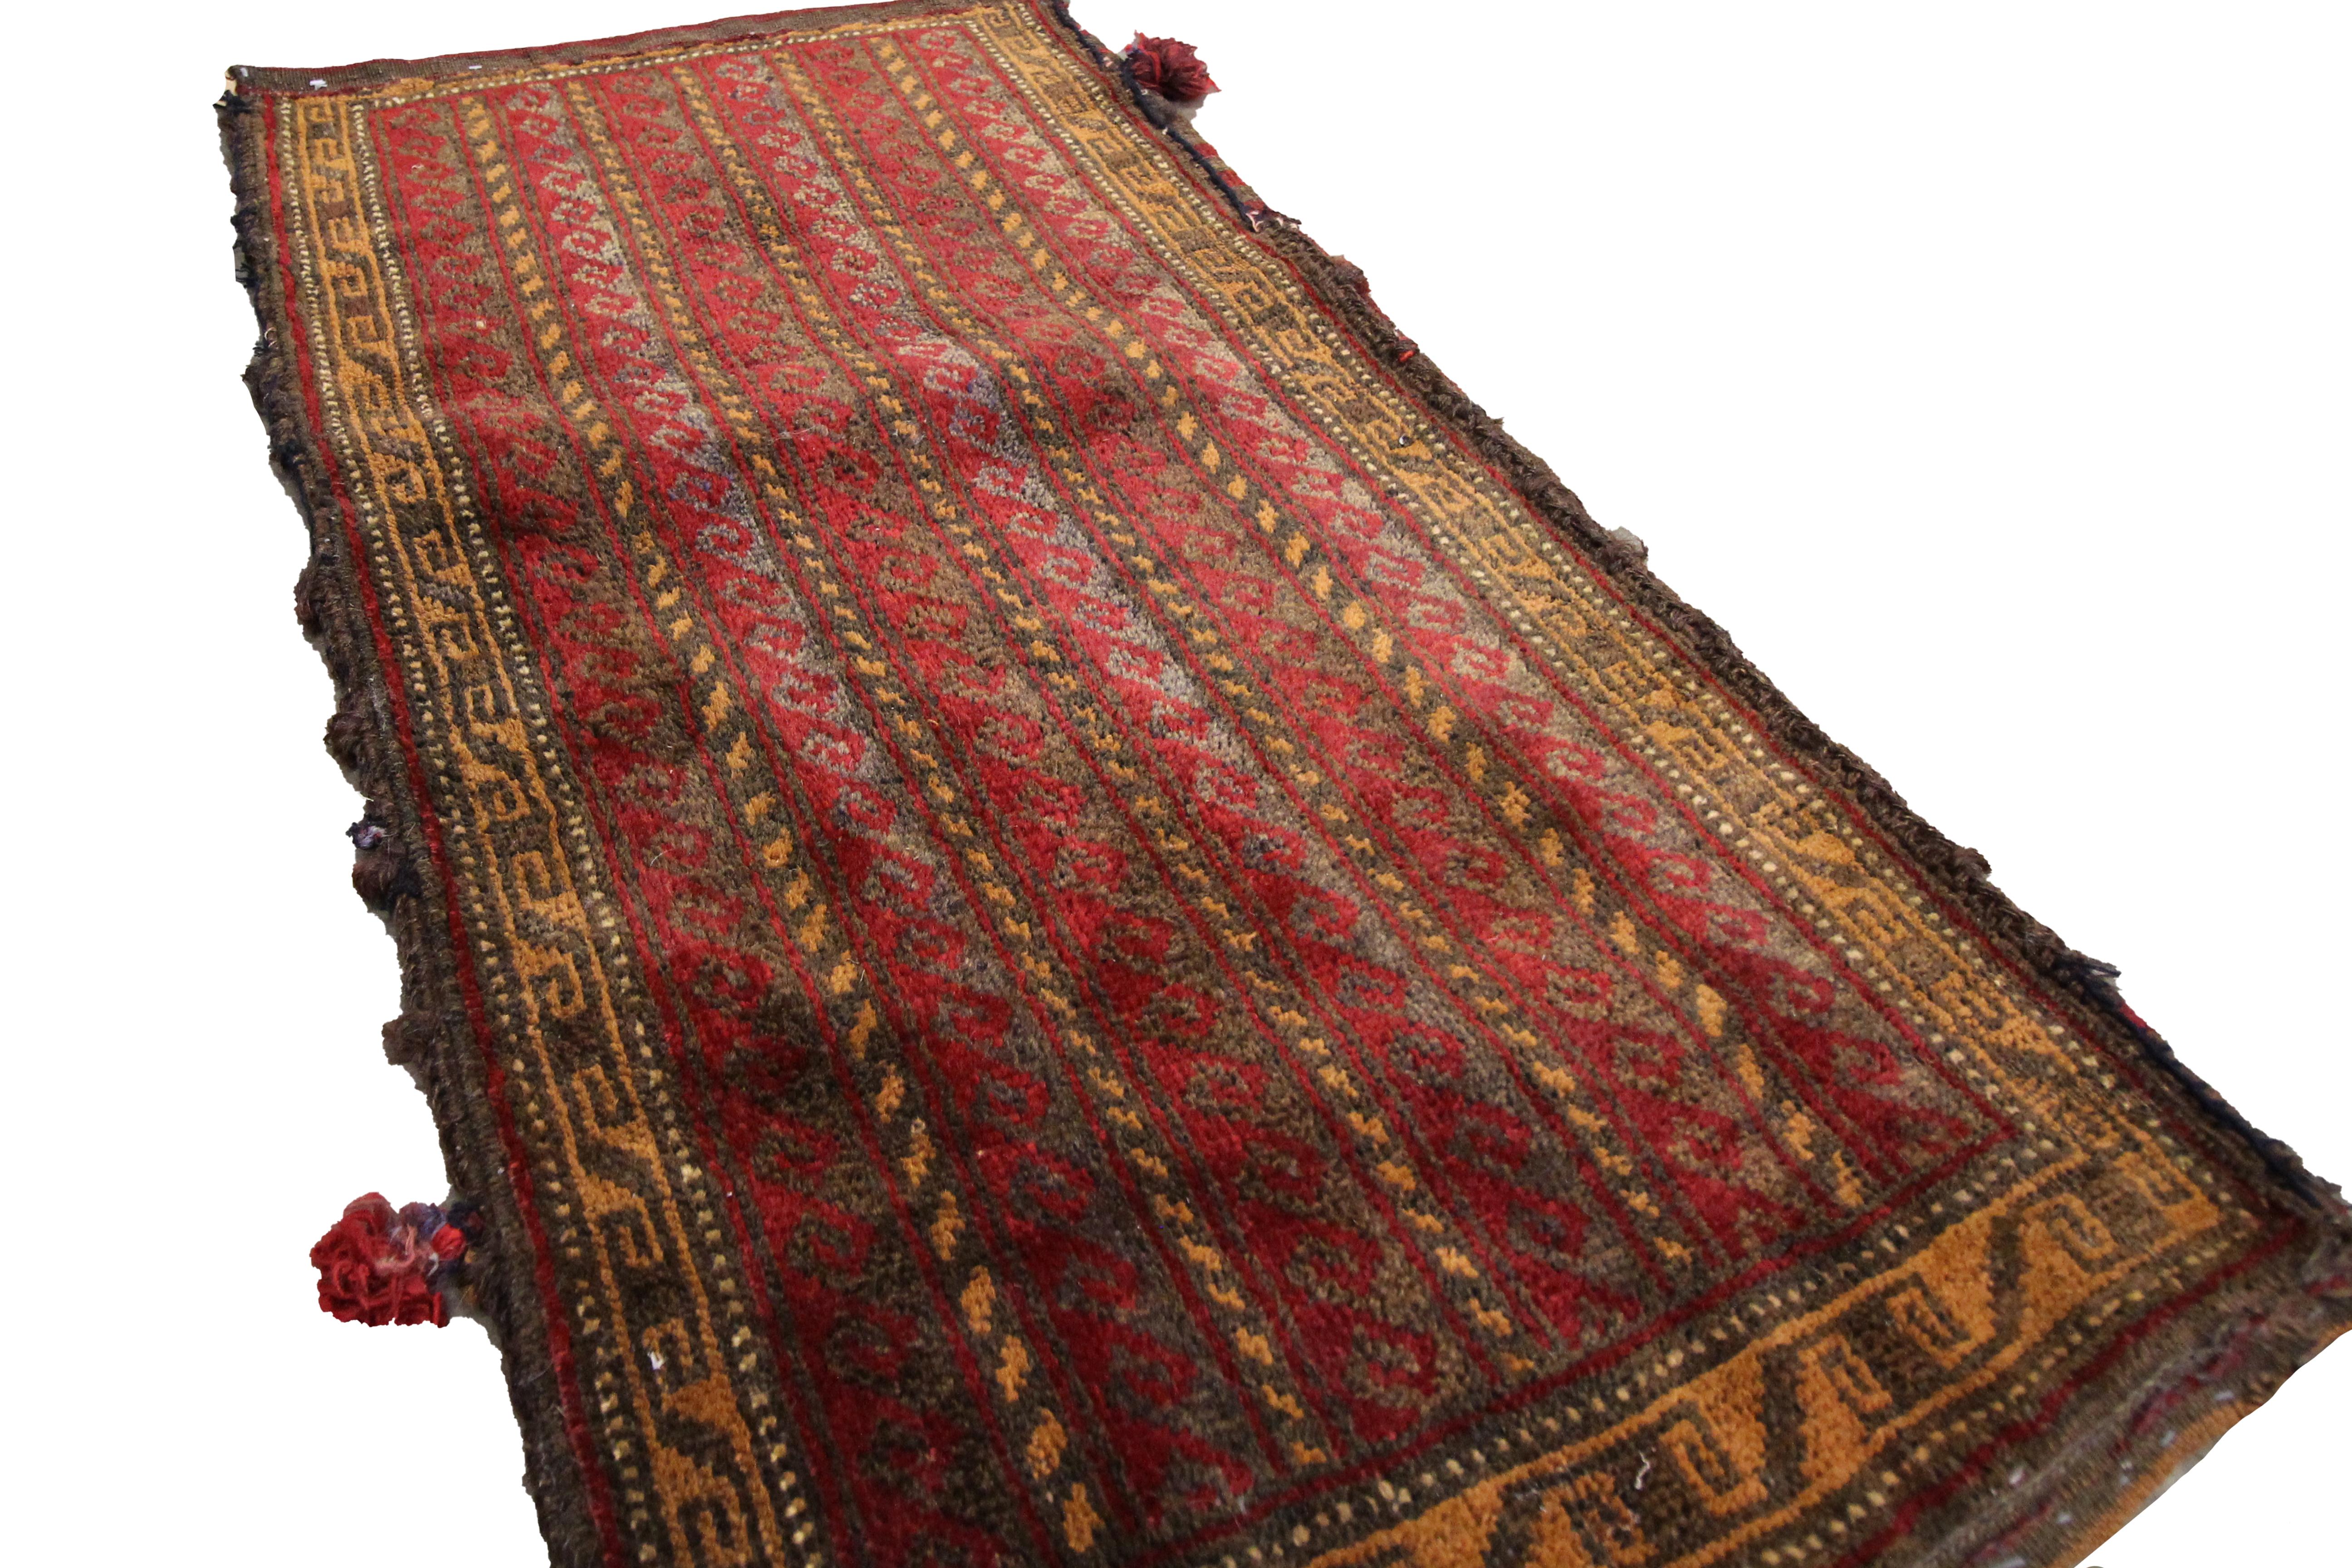 This bold wool rug is an antique Chuval Rug woven by hand in 1910. The design features a traditional stripe design with hook details woven in red and brown. The symmetrical geometric design and bold colour palette make this piece the perfect accent